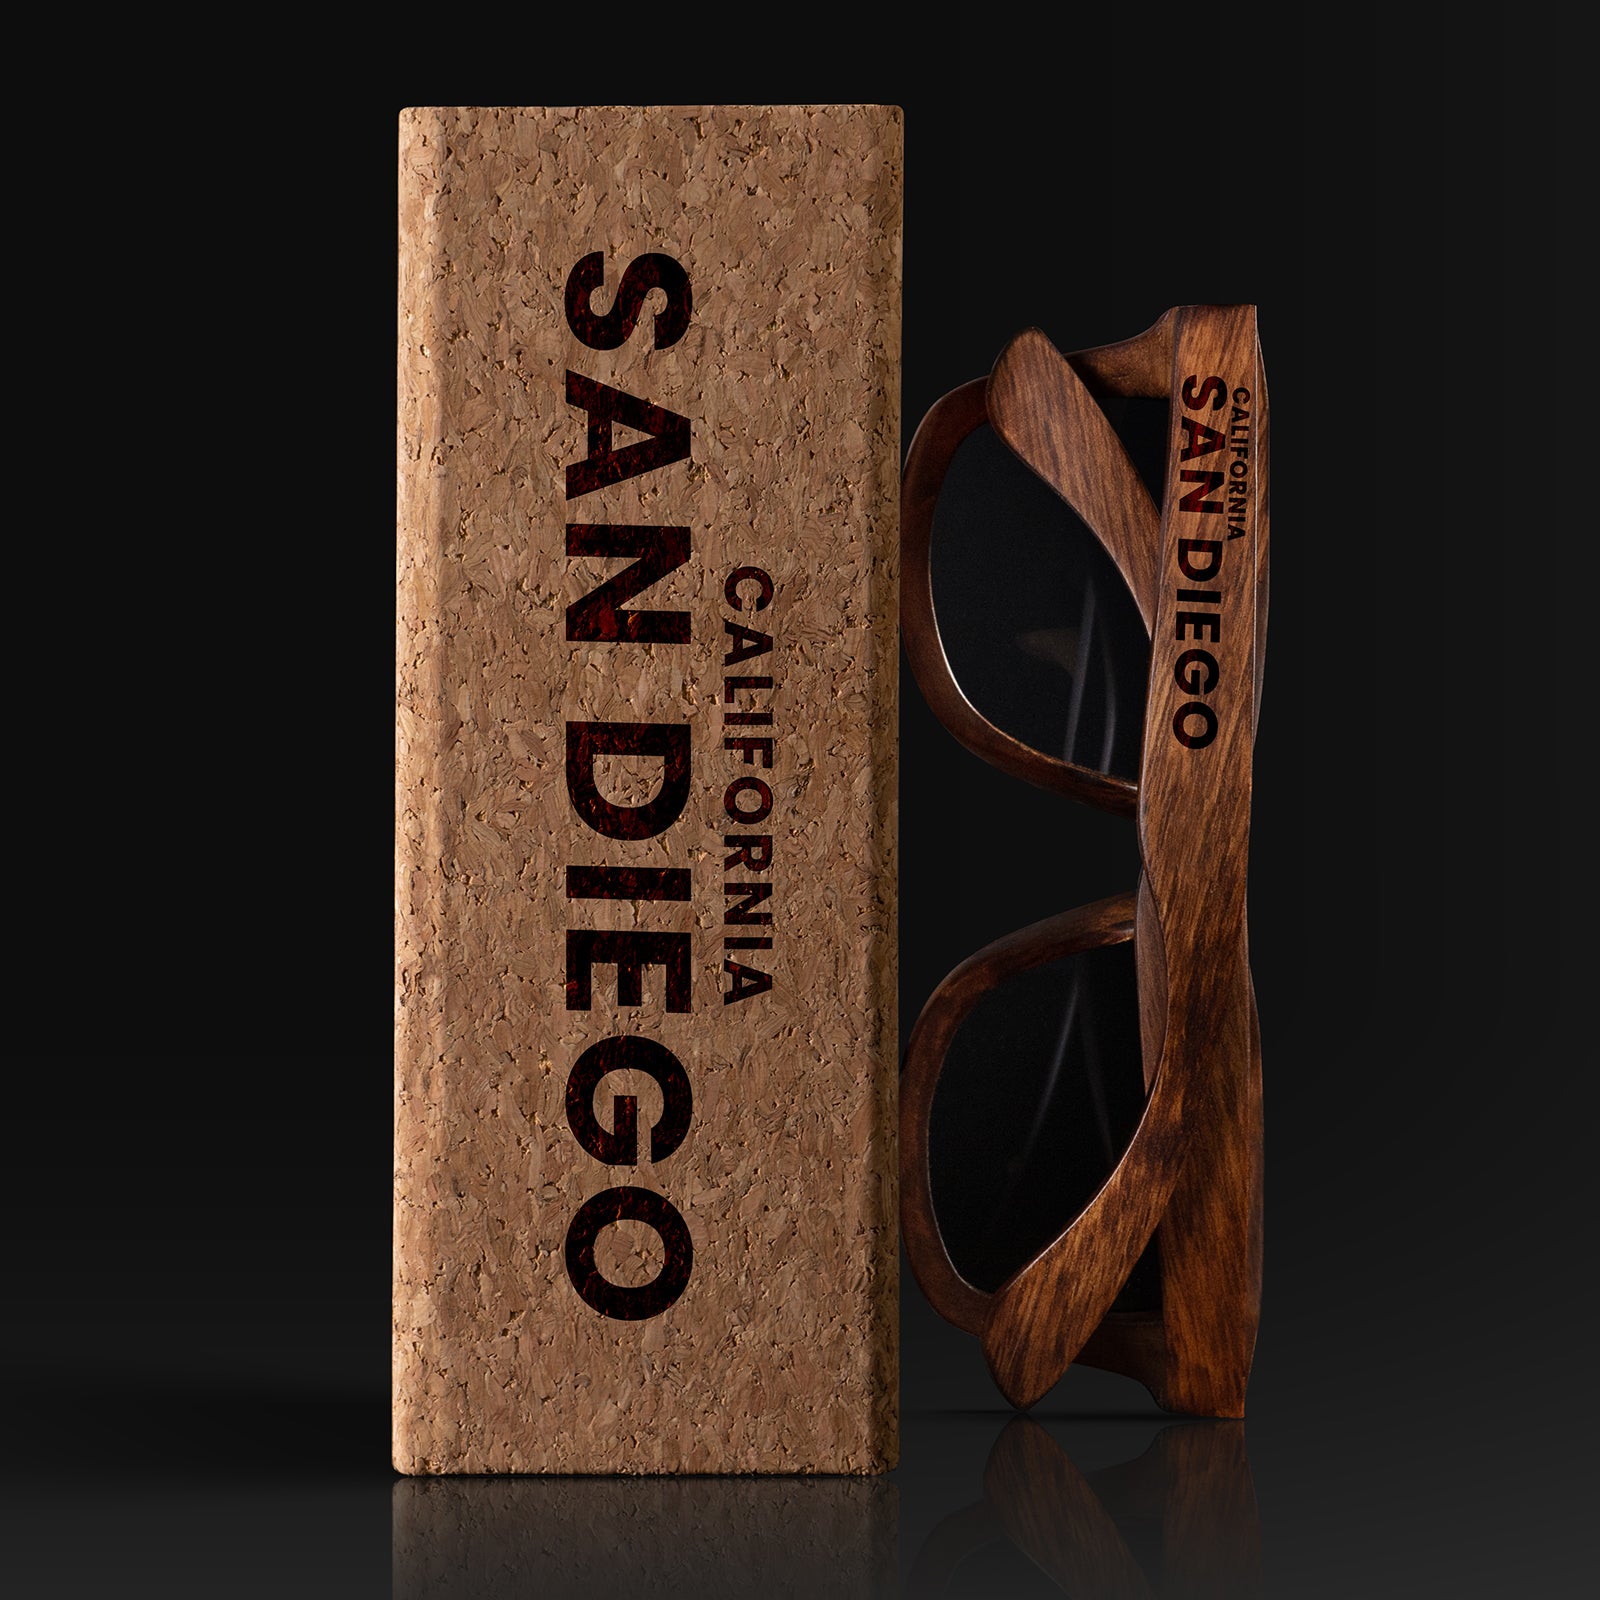 San Diego California Wood Sunglasses with custom engraving. Custom San Diego California Gifts For Men -  Sustainable San Diego California eco friendly products - Personalized San Diego California Birthday Gifts - Unique San Diego California travel Souvenirs and gift shops. San Diego California Wayfarer Eyewear and Shades wiith Box